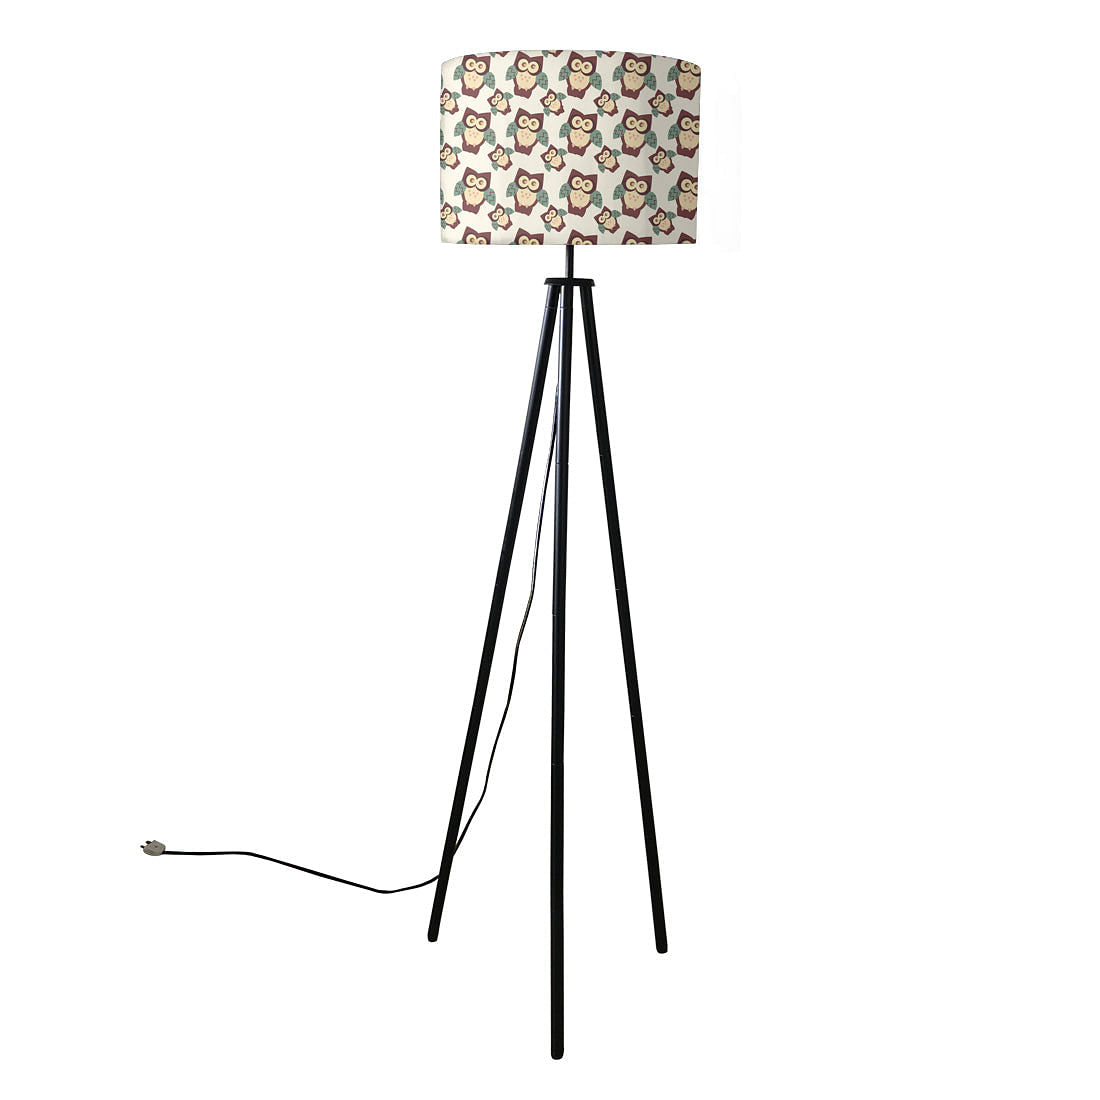 Tripod Floor Lamp Standing Light for Living Rooms -Cute Owls Nutcase